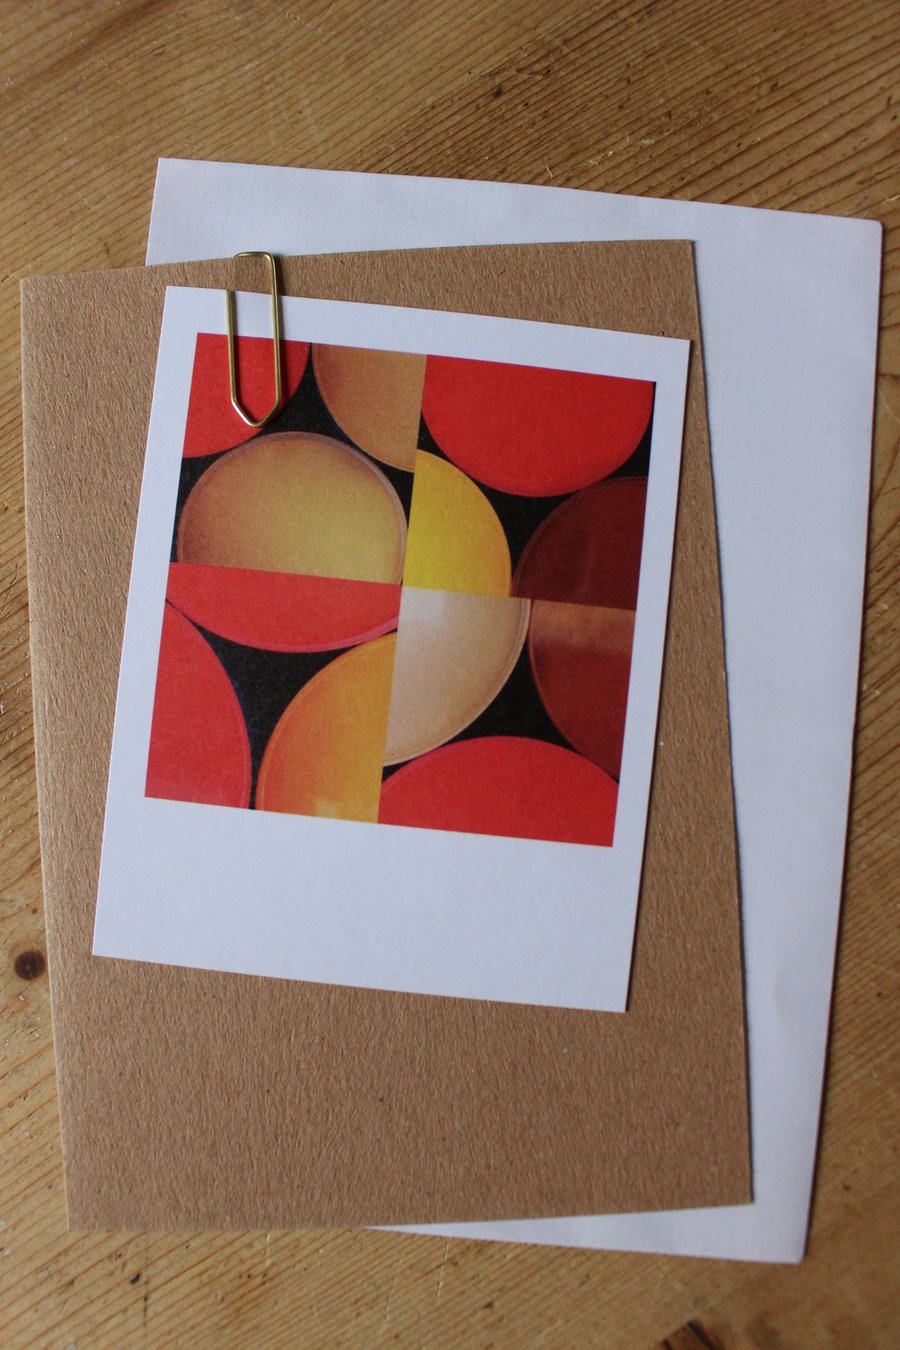 “Polaroid” style photo card: abstracts and patterns